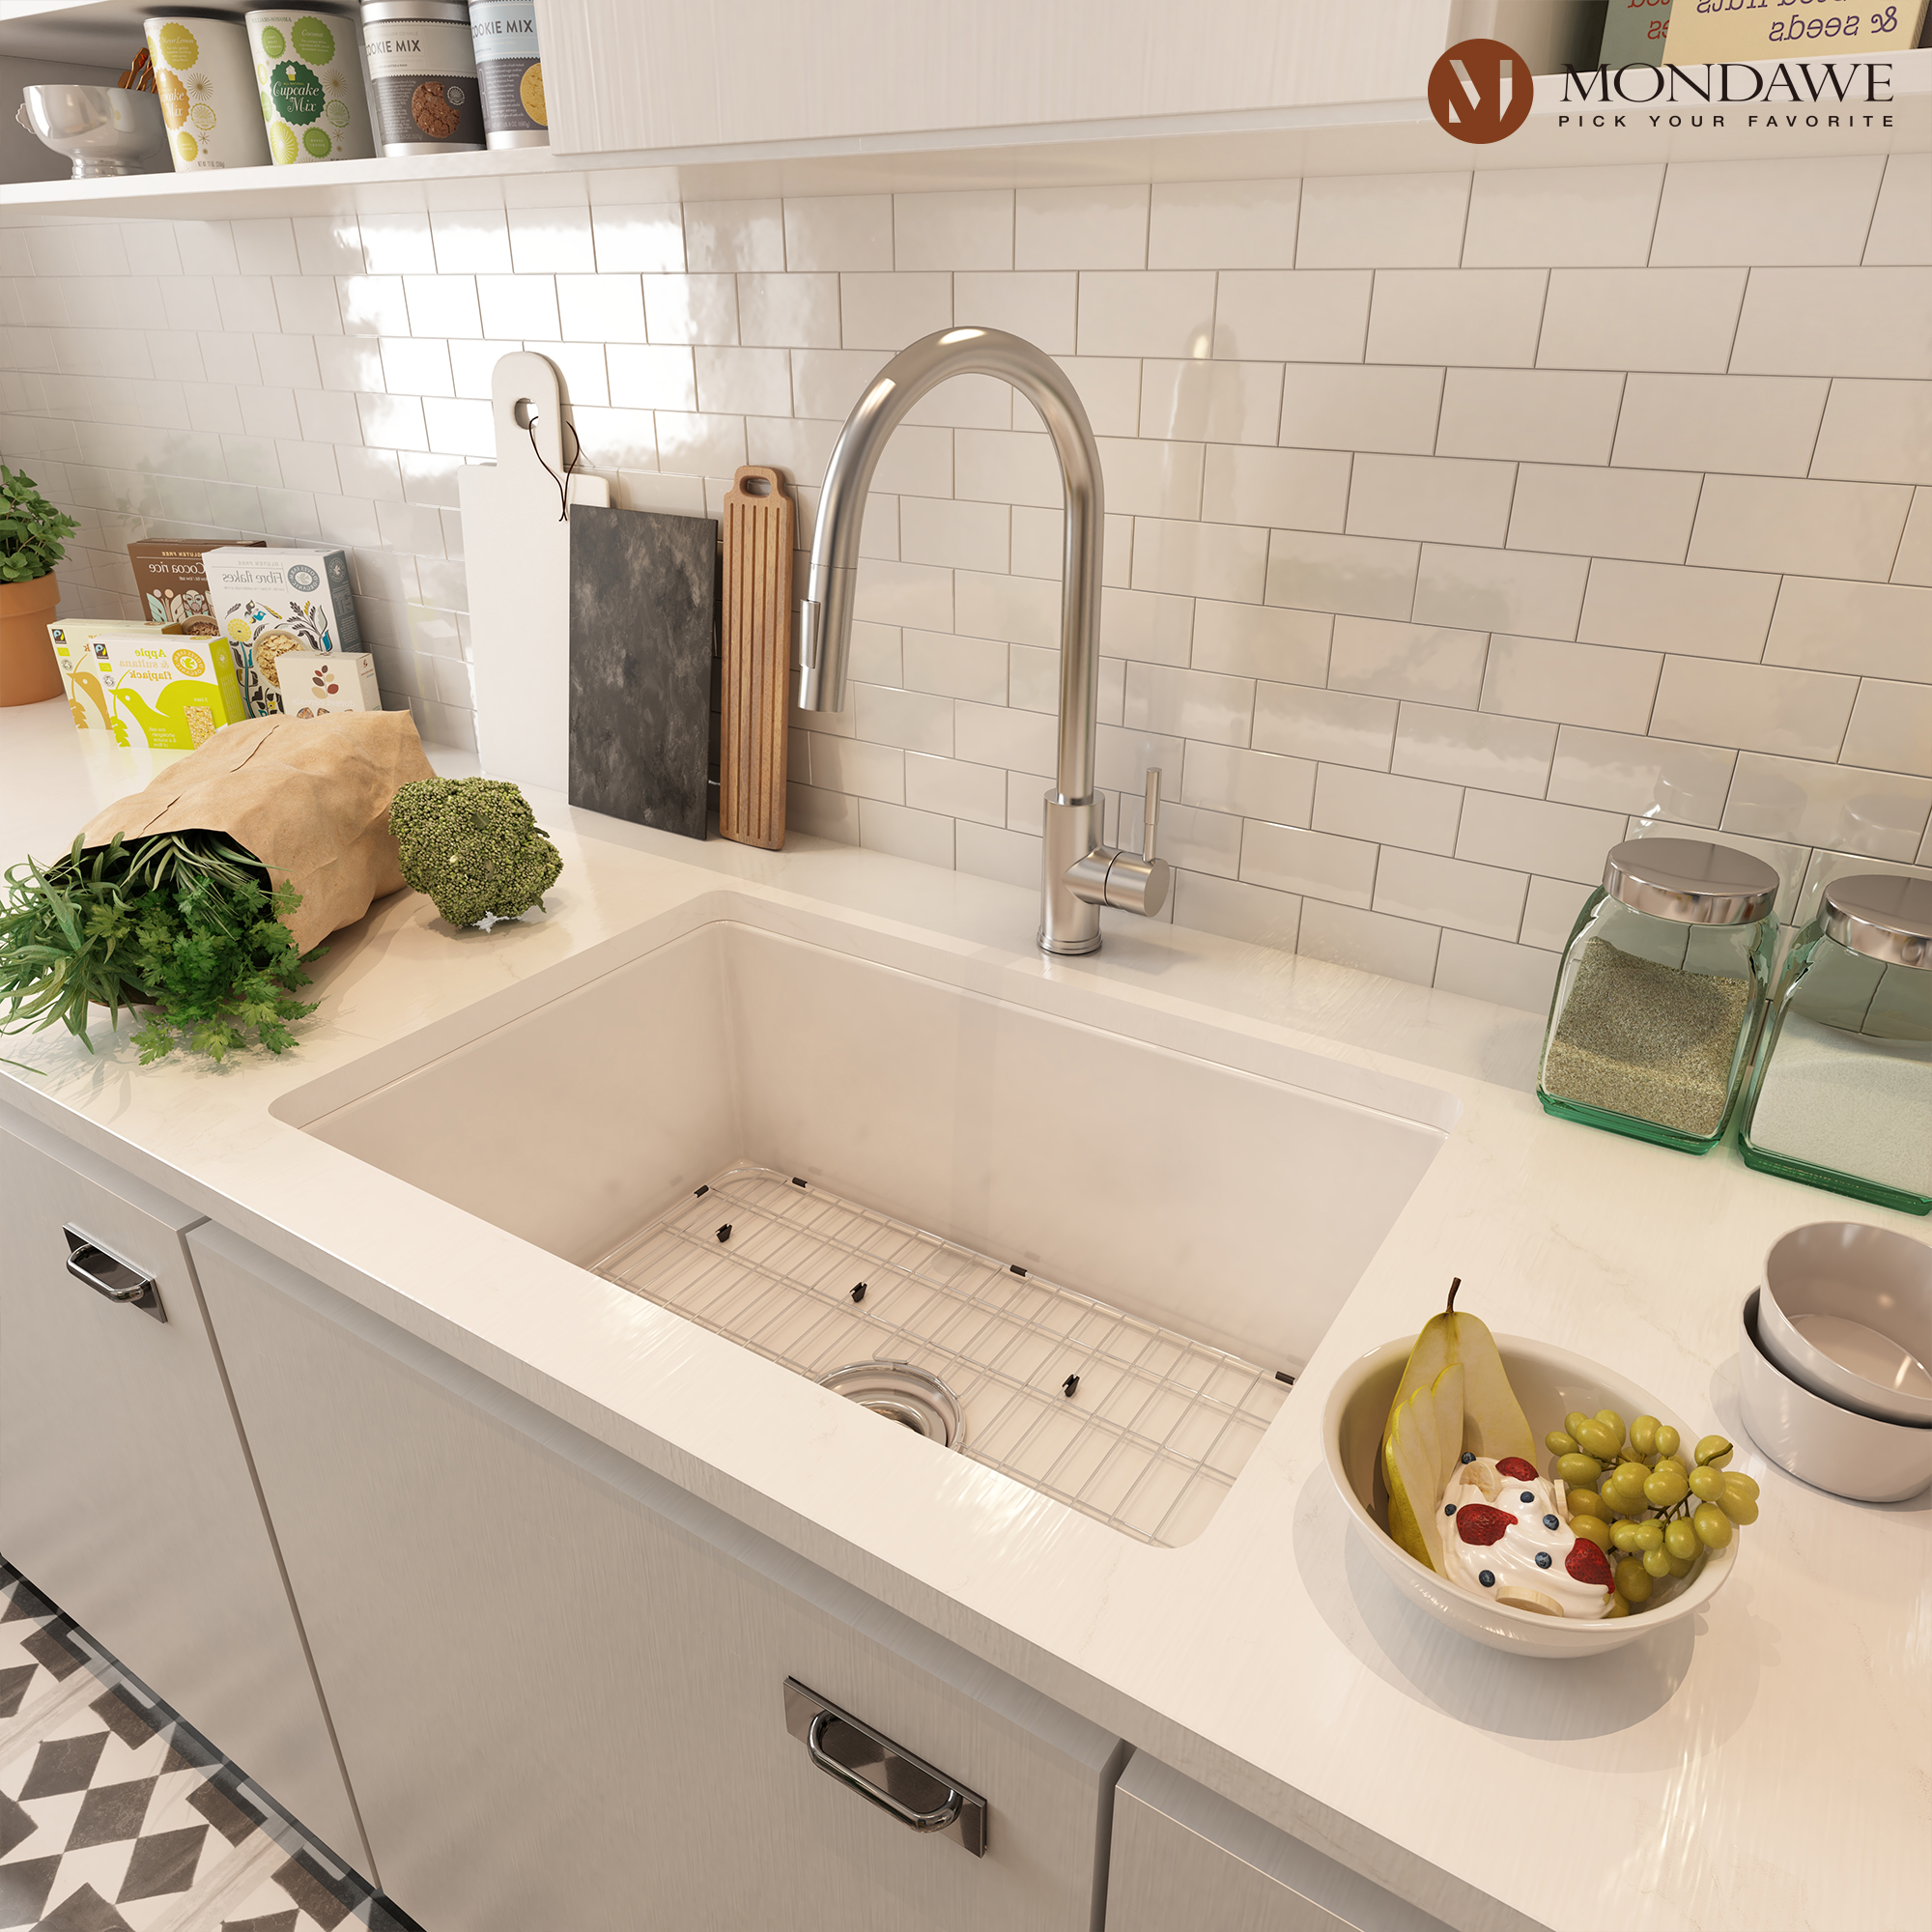 Undermount 27 in. single bowl fireclay kitchen sink in white comes with pull-down faucet-Mondawe